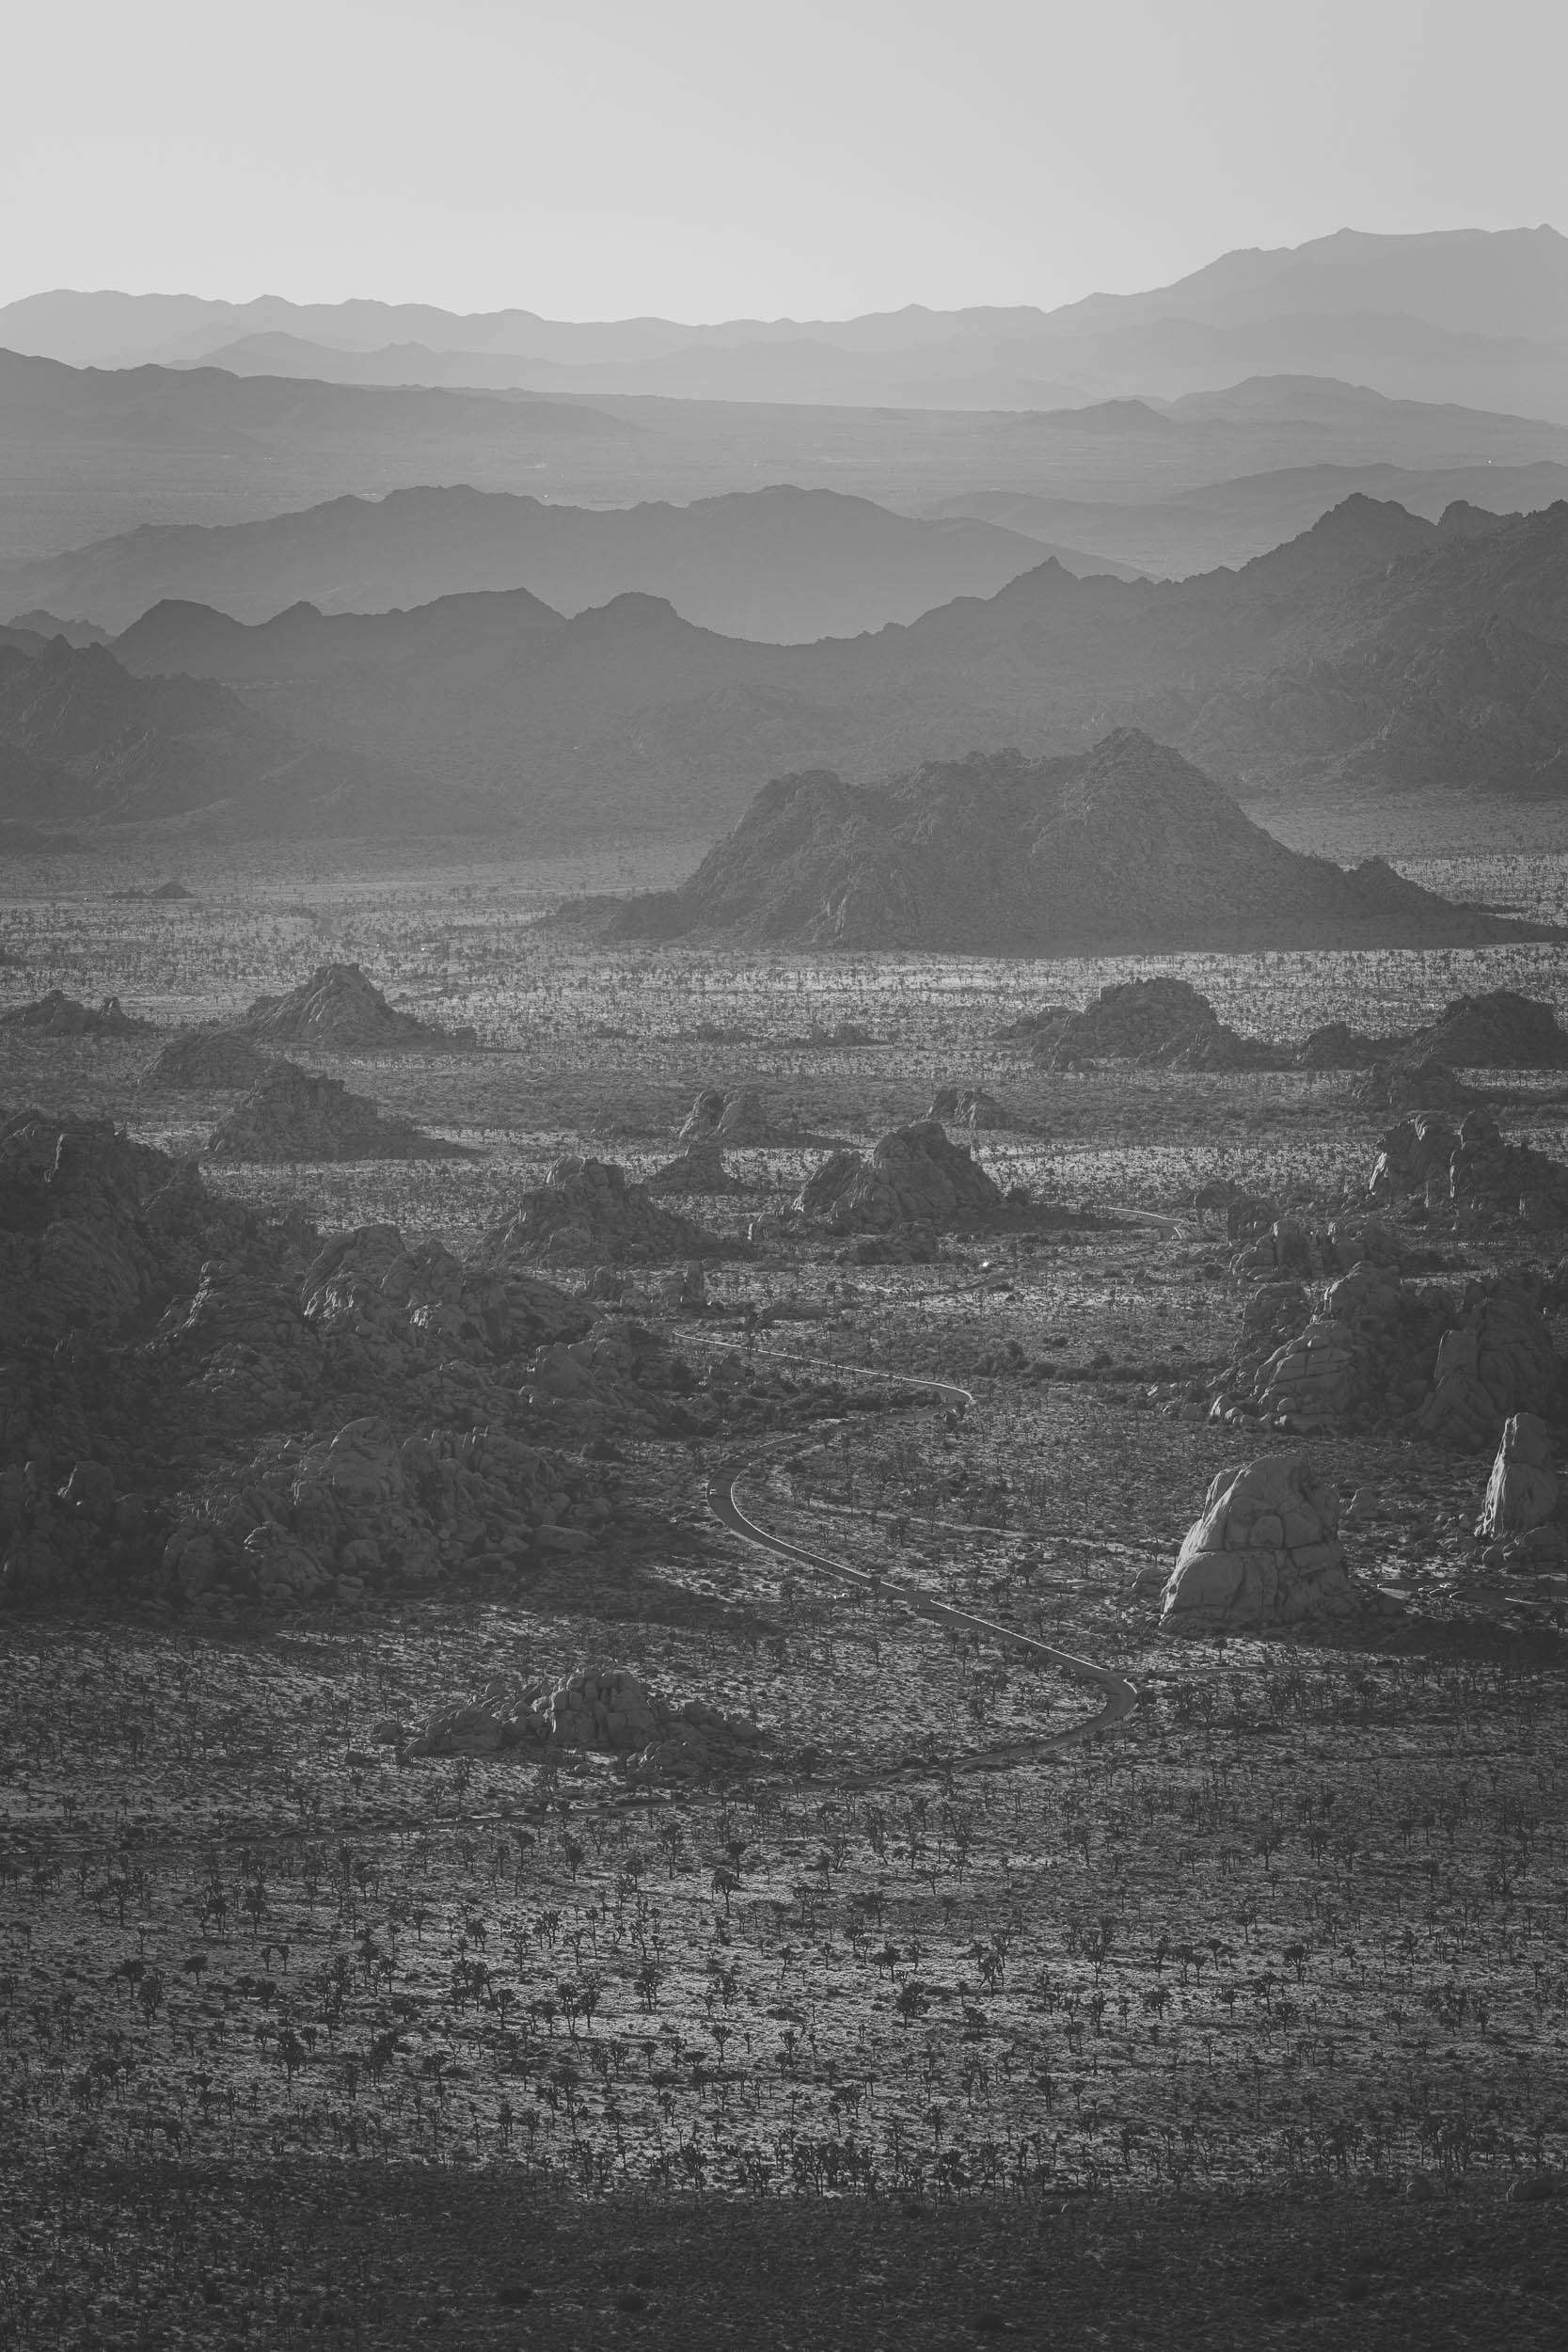 A black and white photo from a mountaintop of a road winding through rock formations on the desert floor